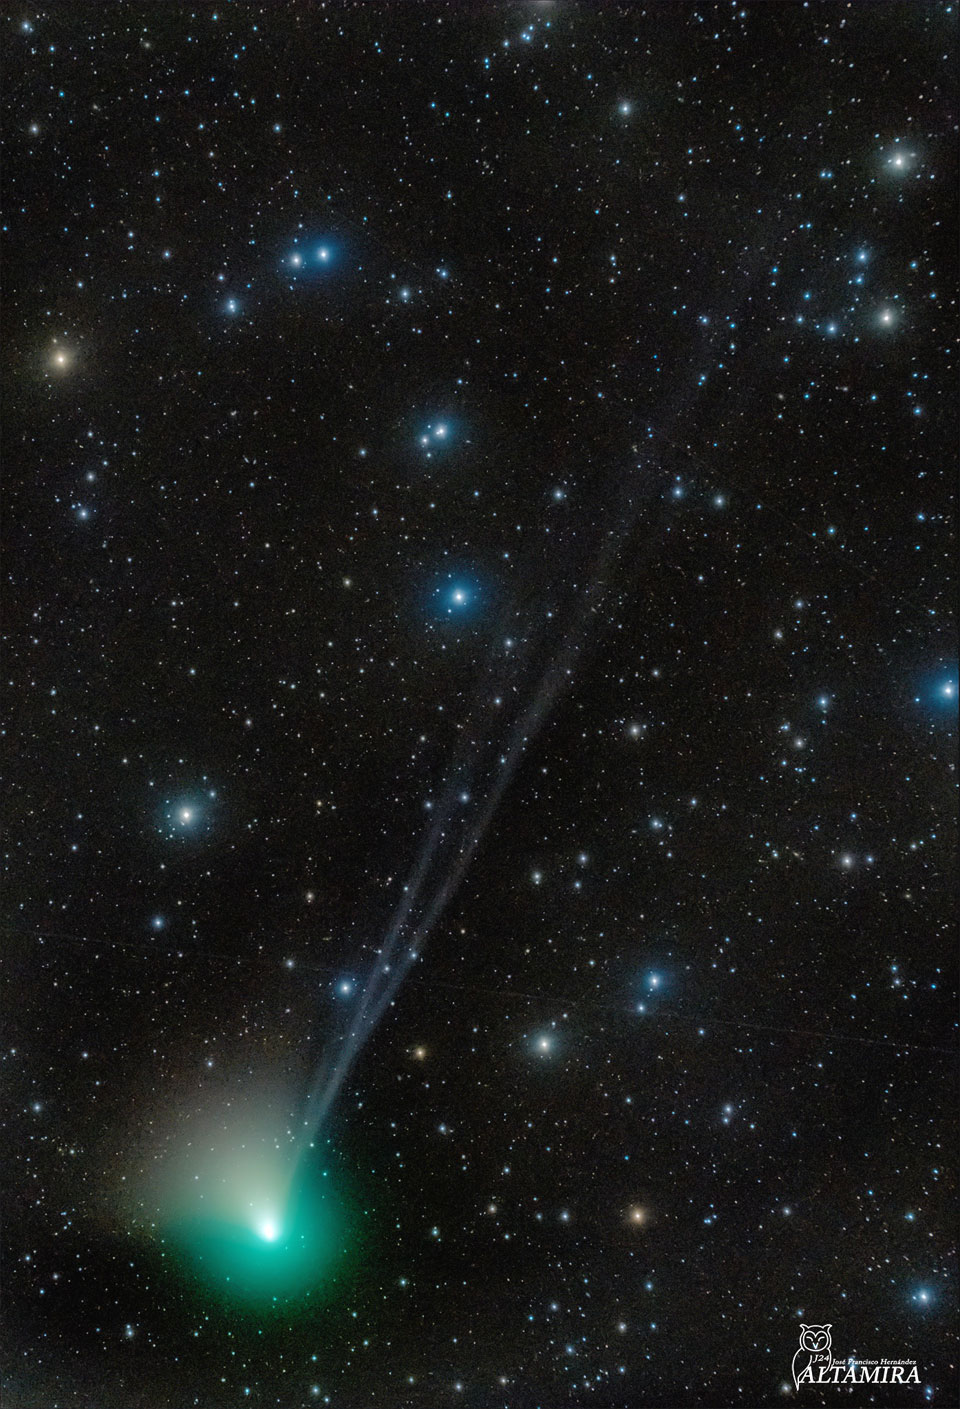 New Comet ZTF is pictured sporting three tails in front of
a background of stars.
Please see the explanation for more detailed information.